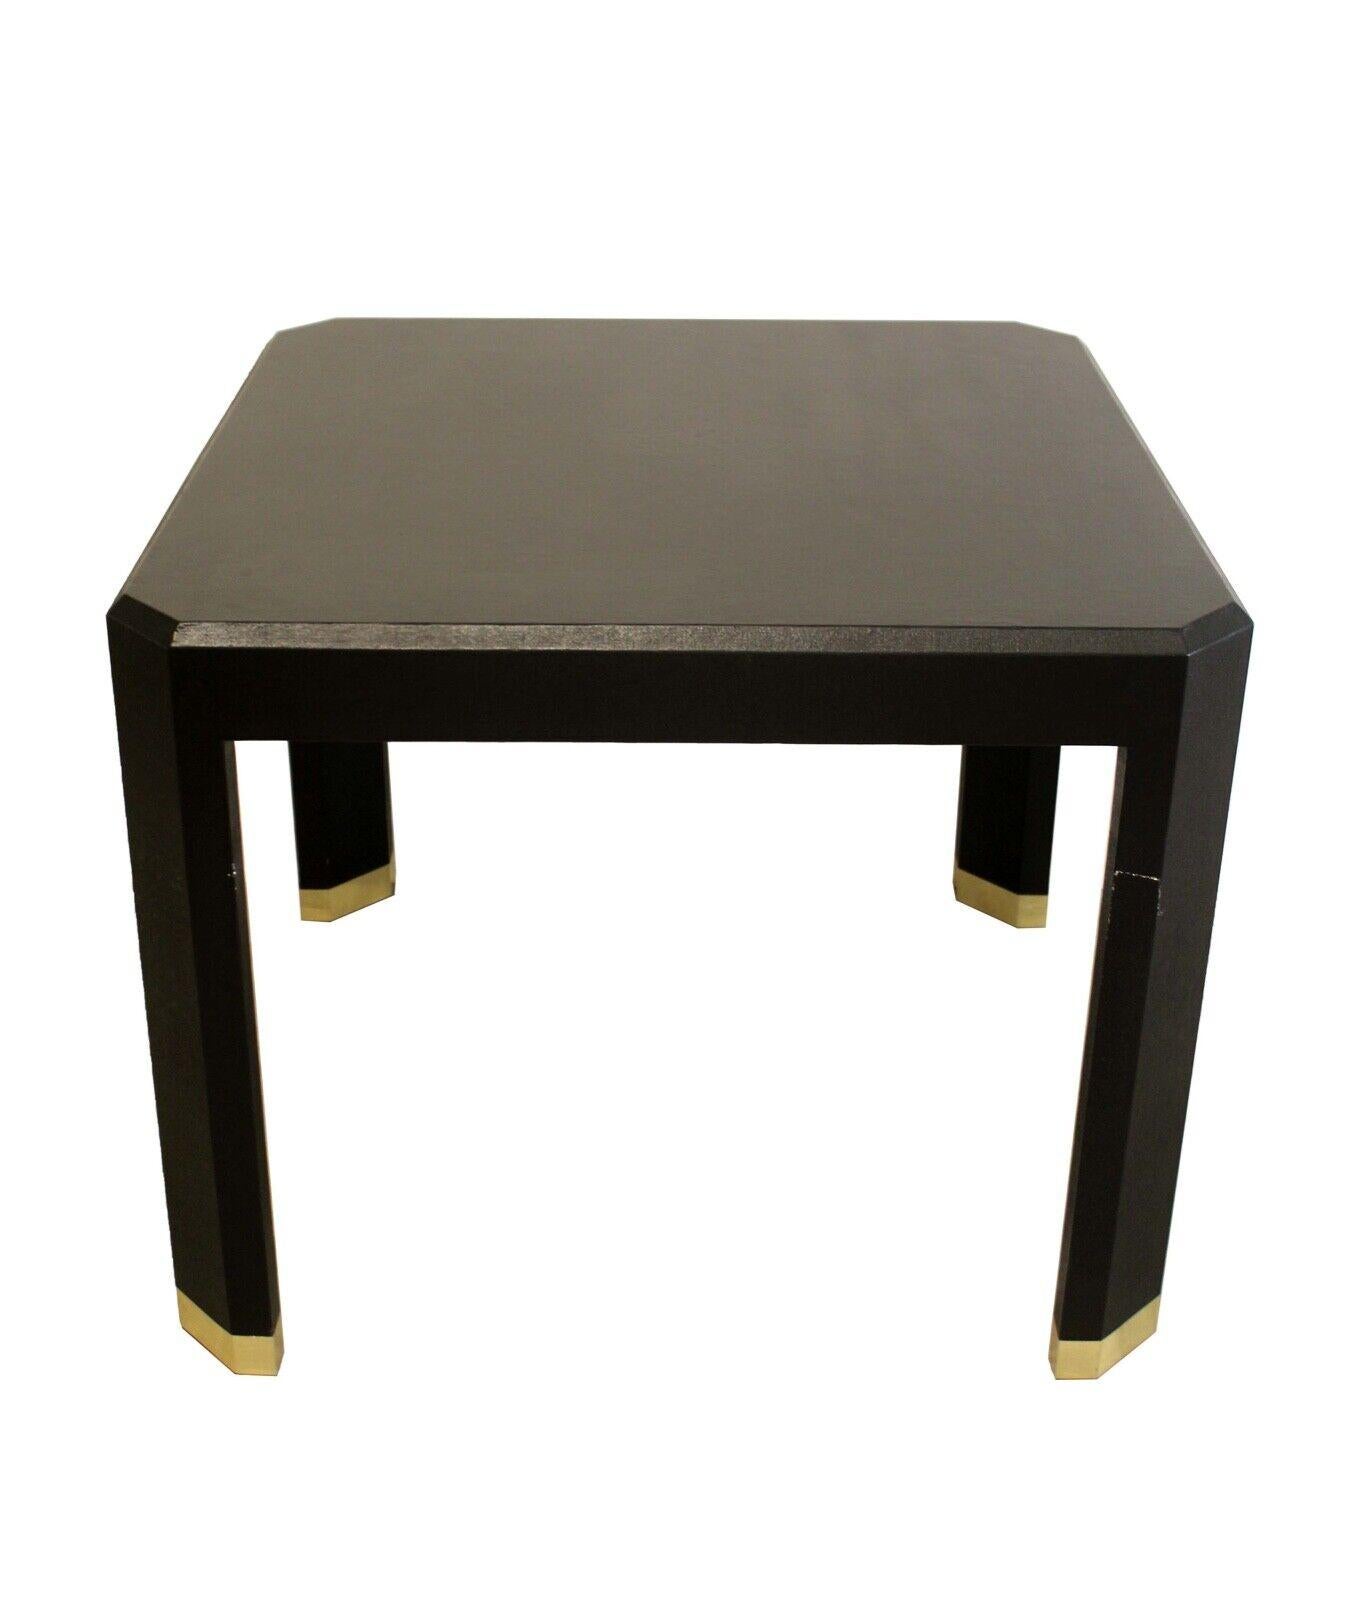 From Le Shoppe Too is this wonderful black grasscloth Springer style dinette or game table with brass caps on table legs. In very good condition. 
Dimensions: 36